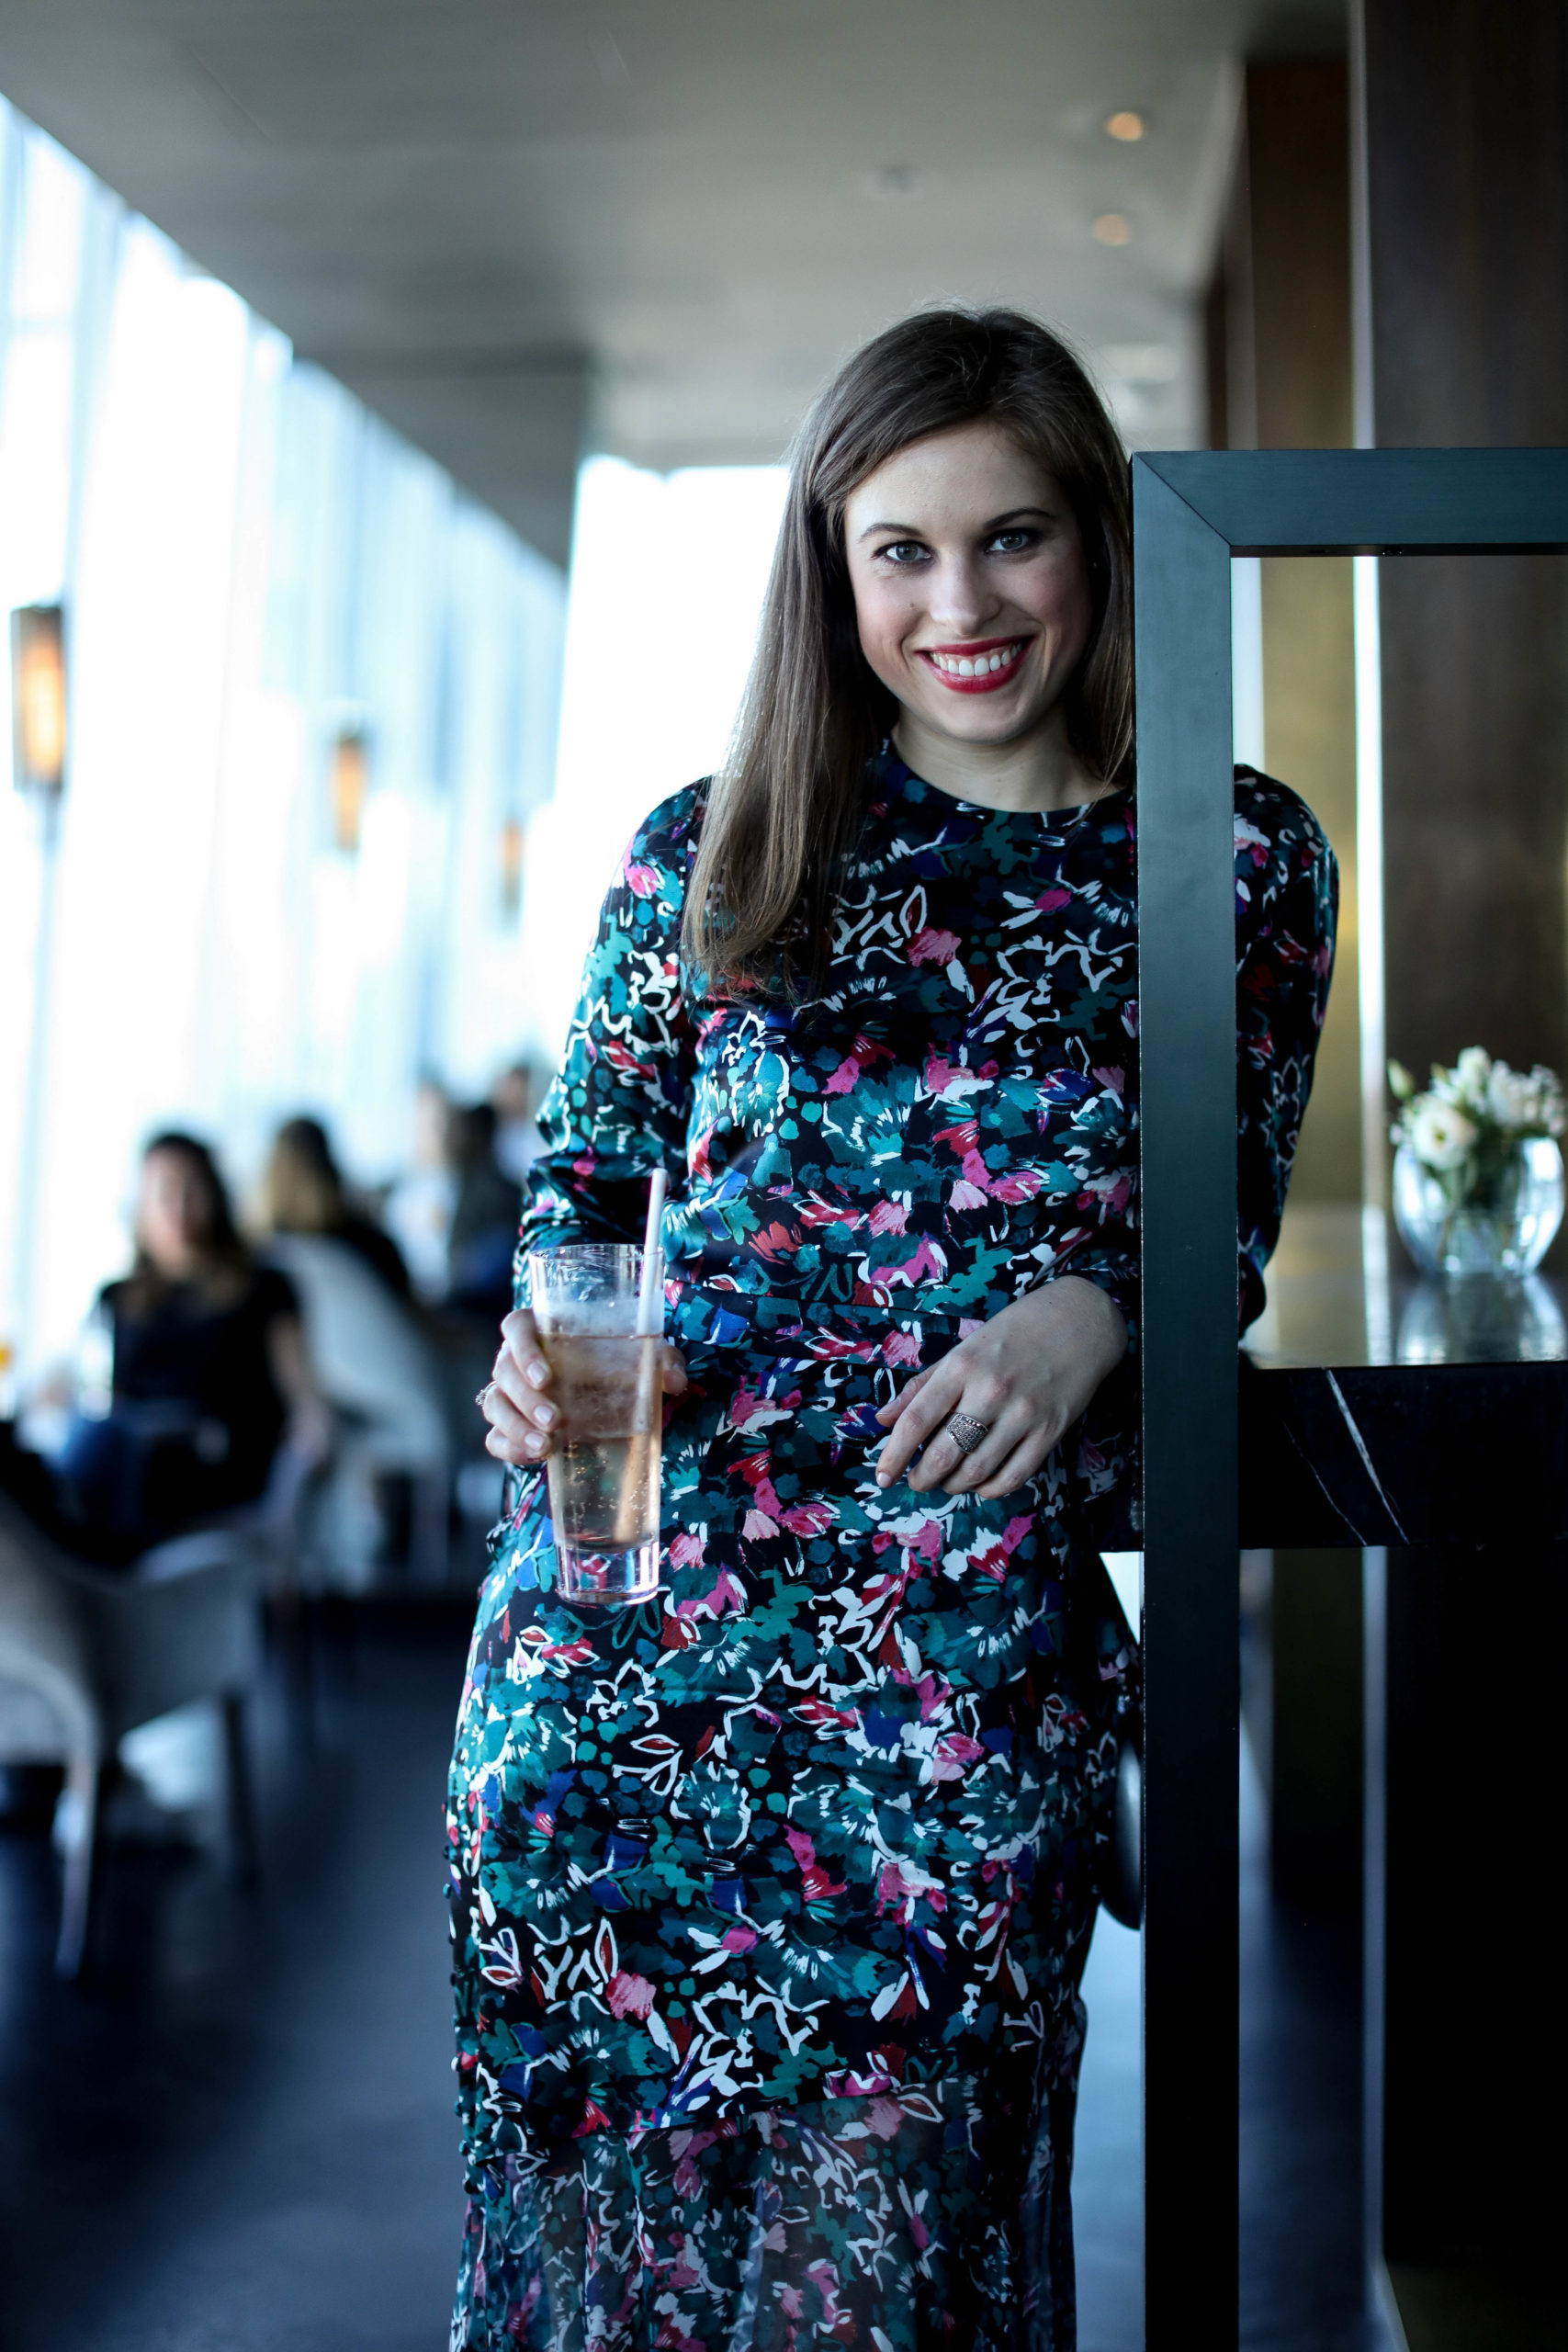 Woman standing at a bar: she has brown straight hair and is wearing a blue & pink printed dress. She is holding a drink